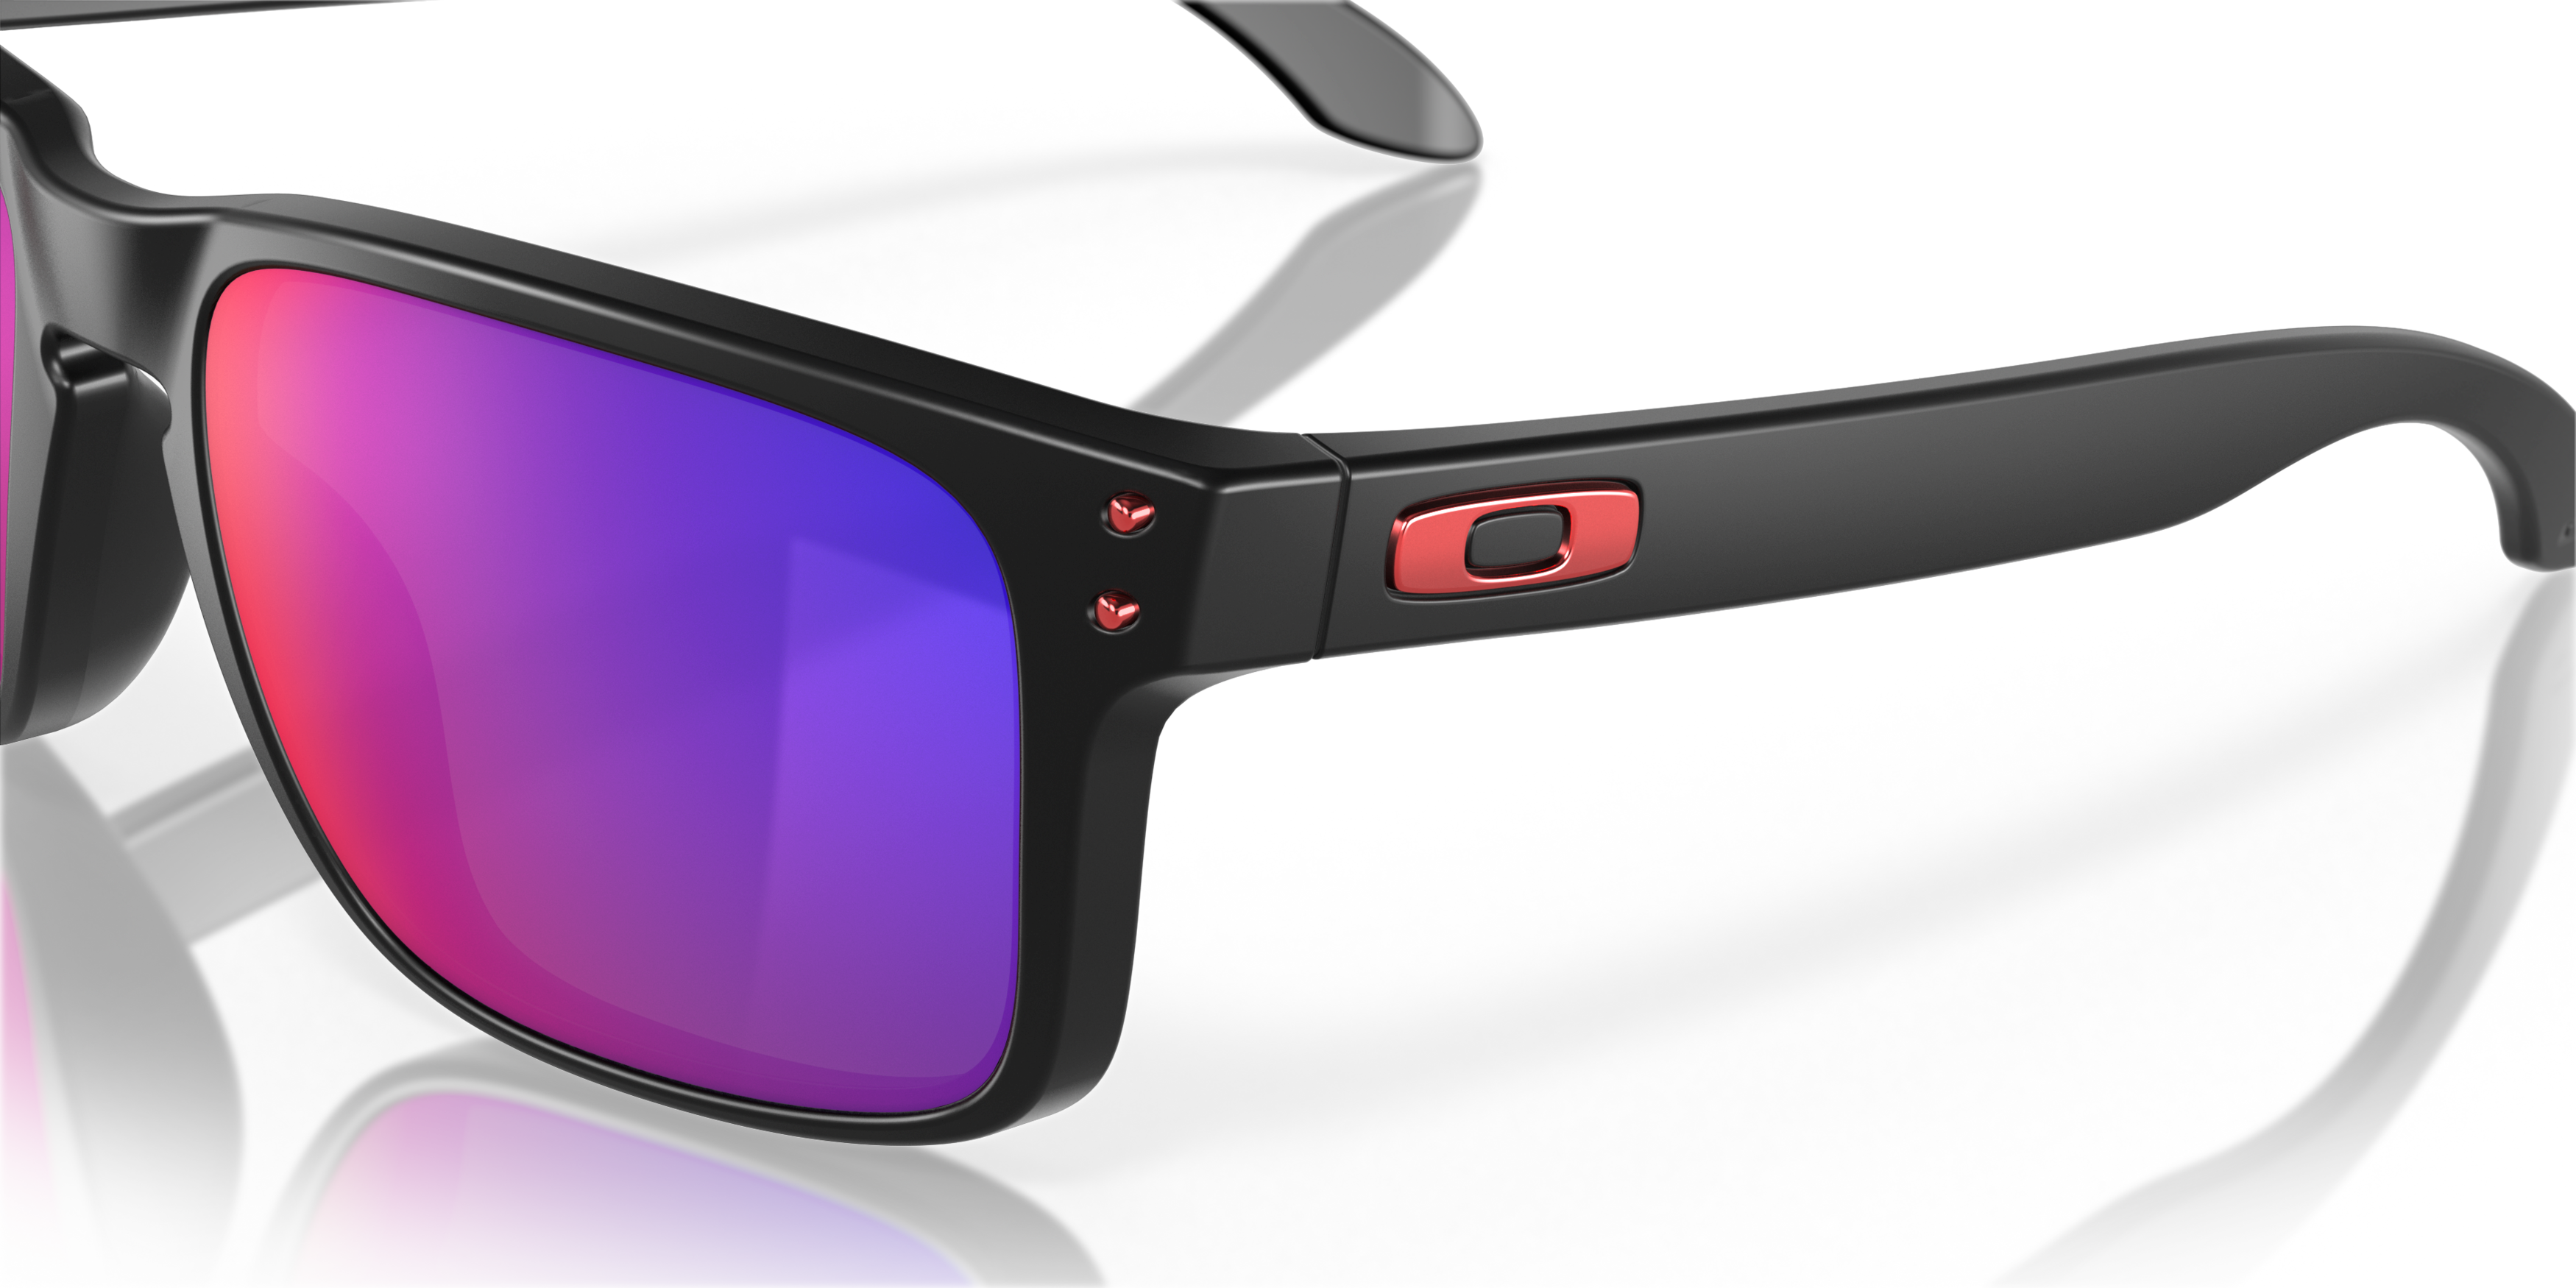 [products.image.detail01] OAKLEY OO9102 910236